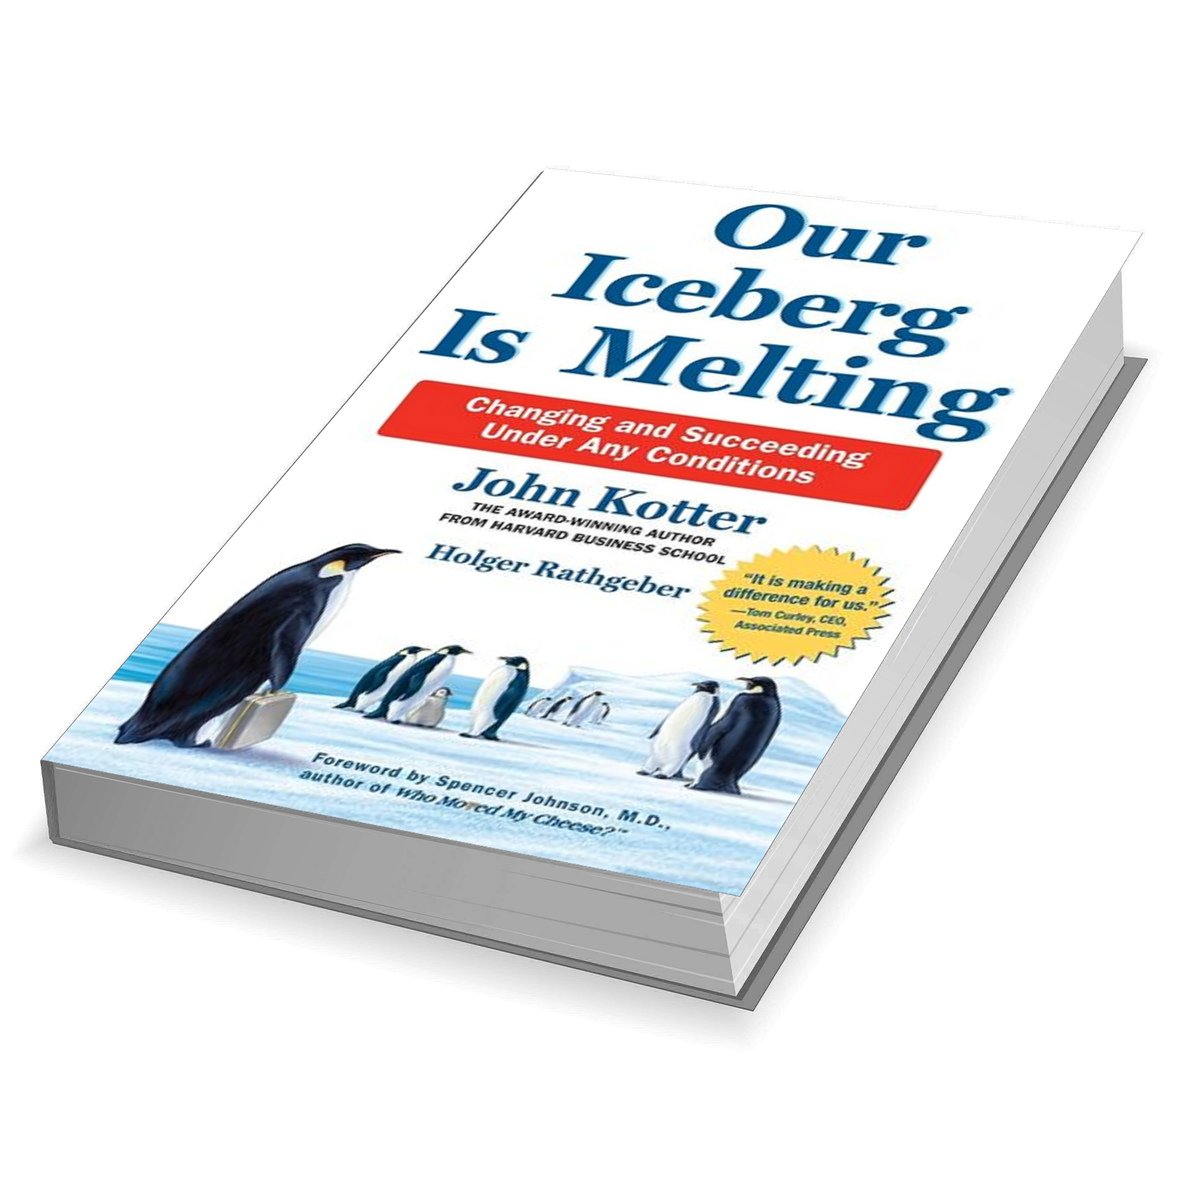 Our Iceberg is Melting